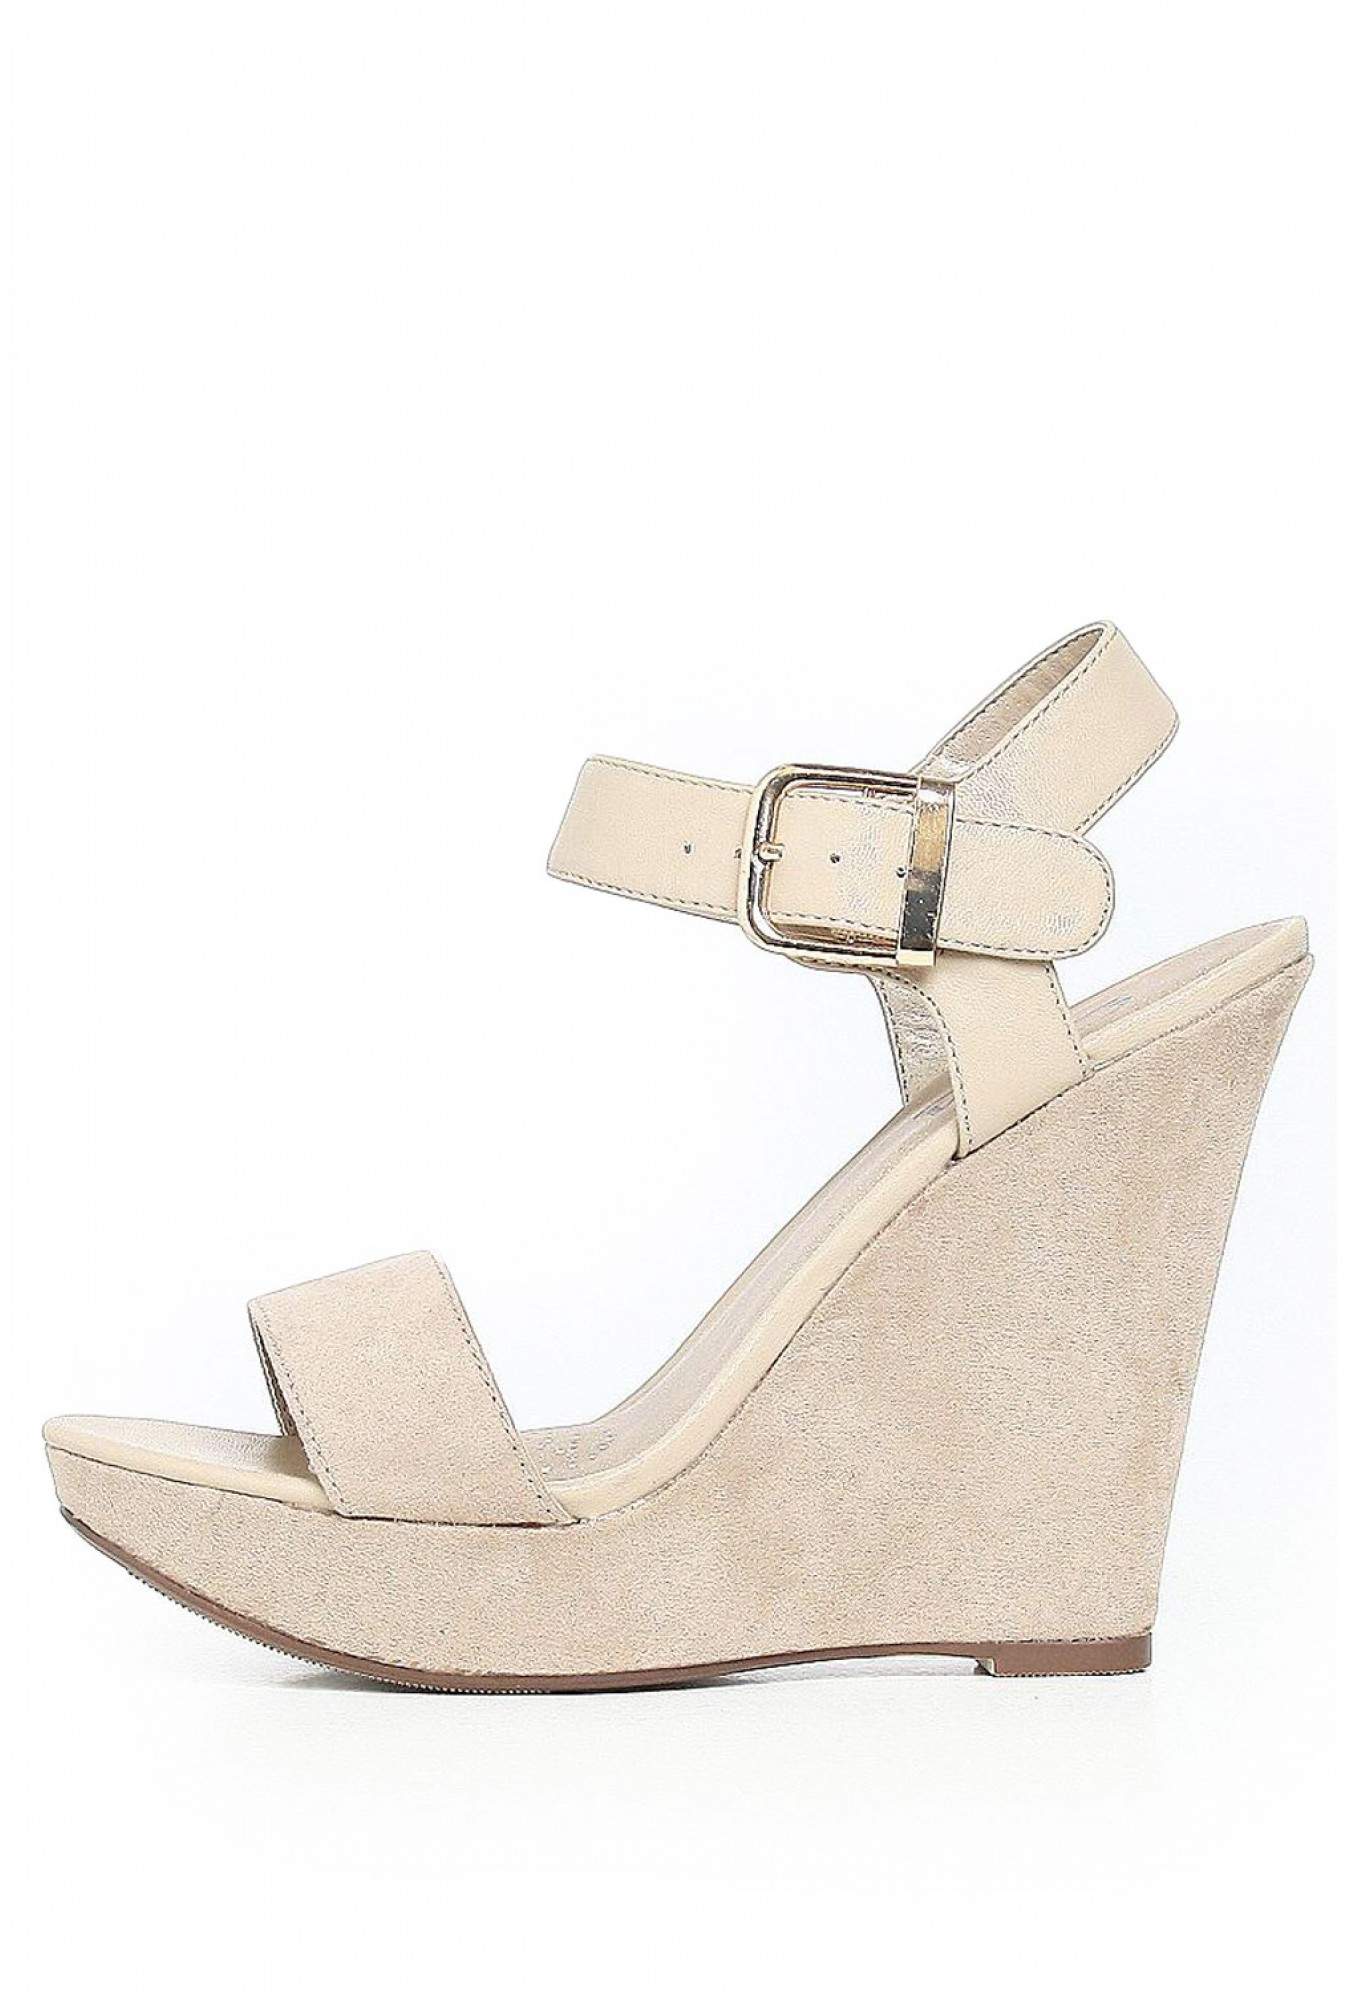 nude flat wedges